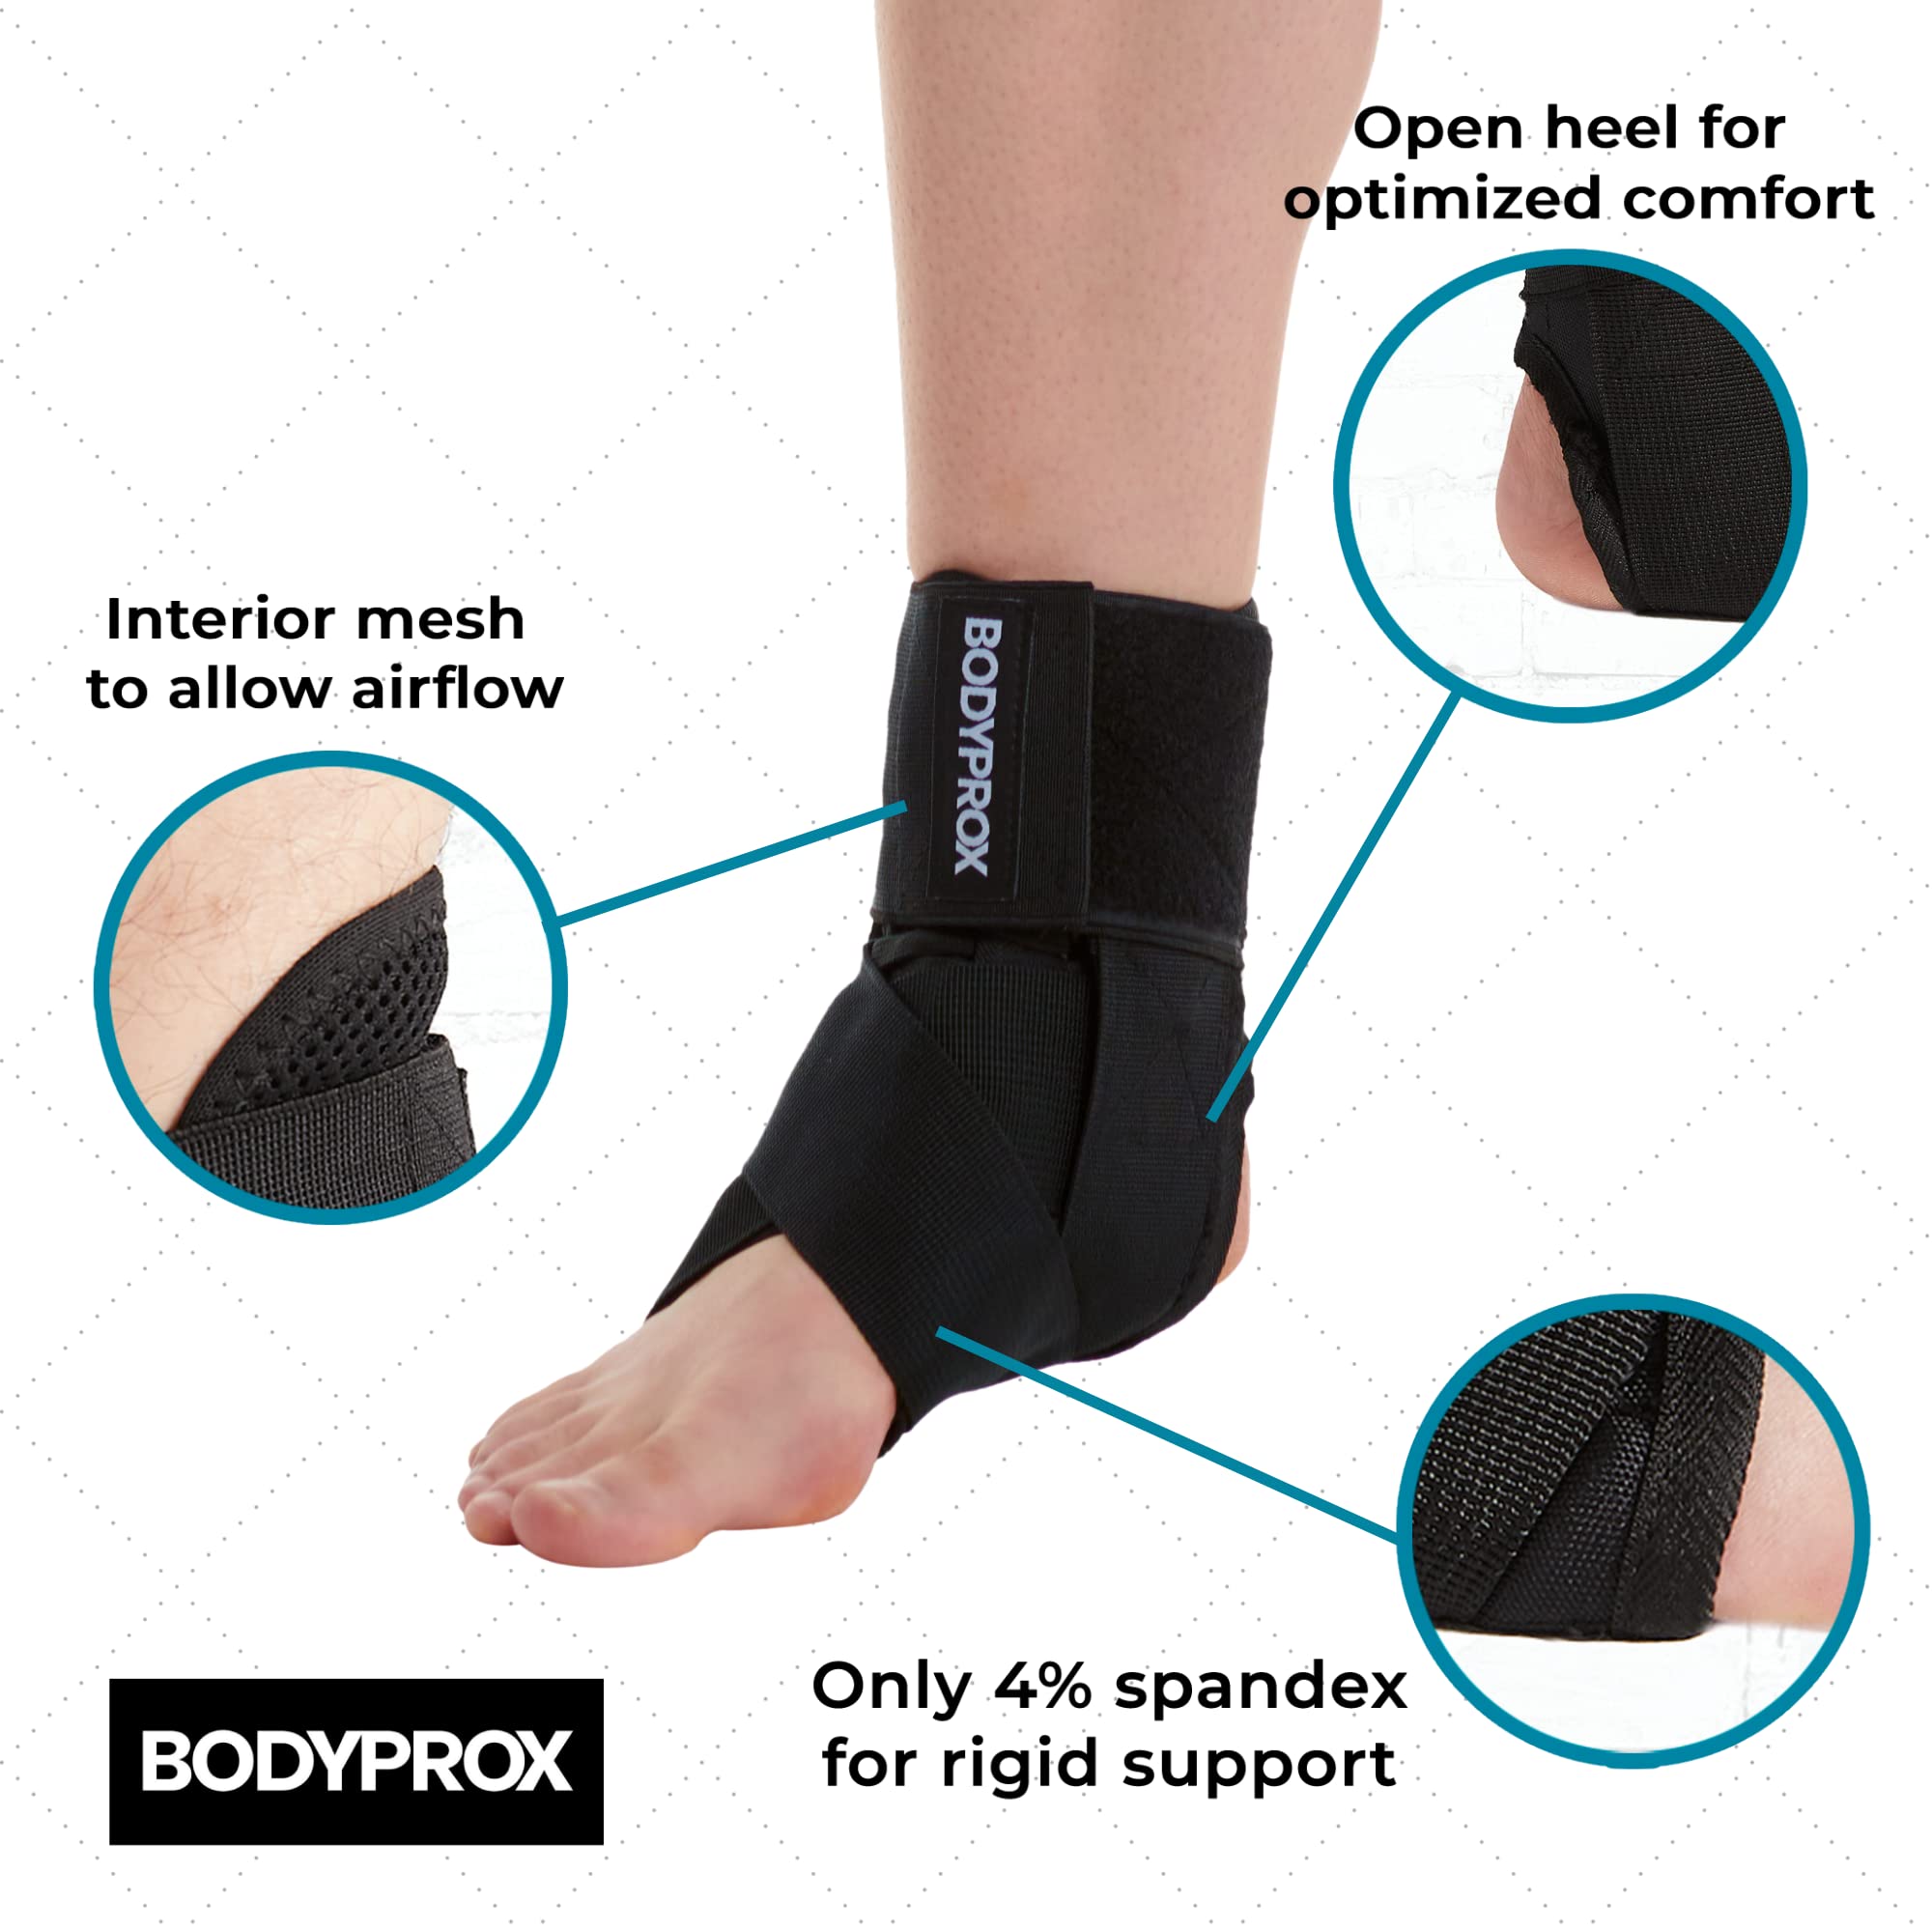 Ankle Brace for Women and Men, Lace Up Ankle Support Brace Stabilizer For Sprained Ankle (Medium)